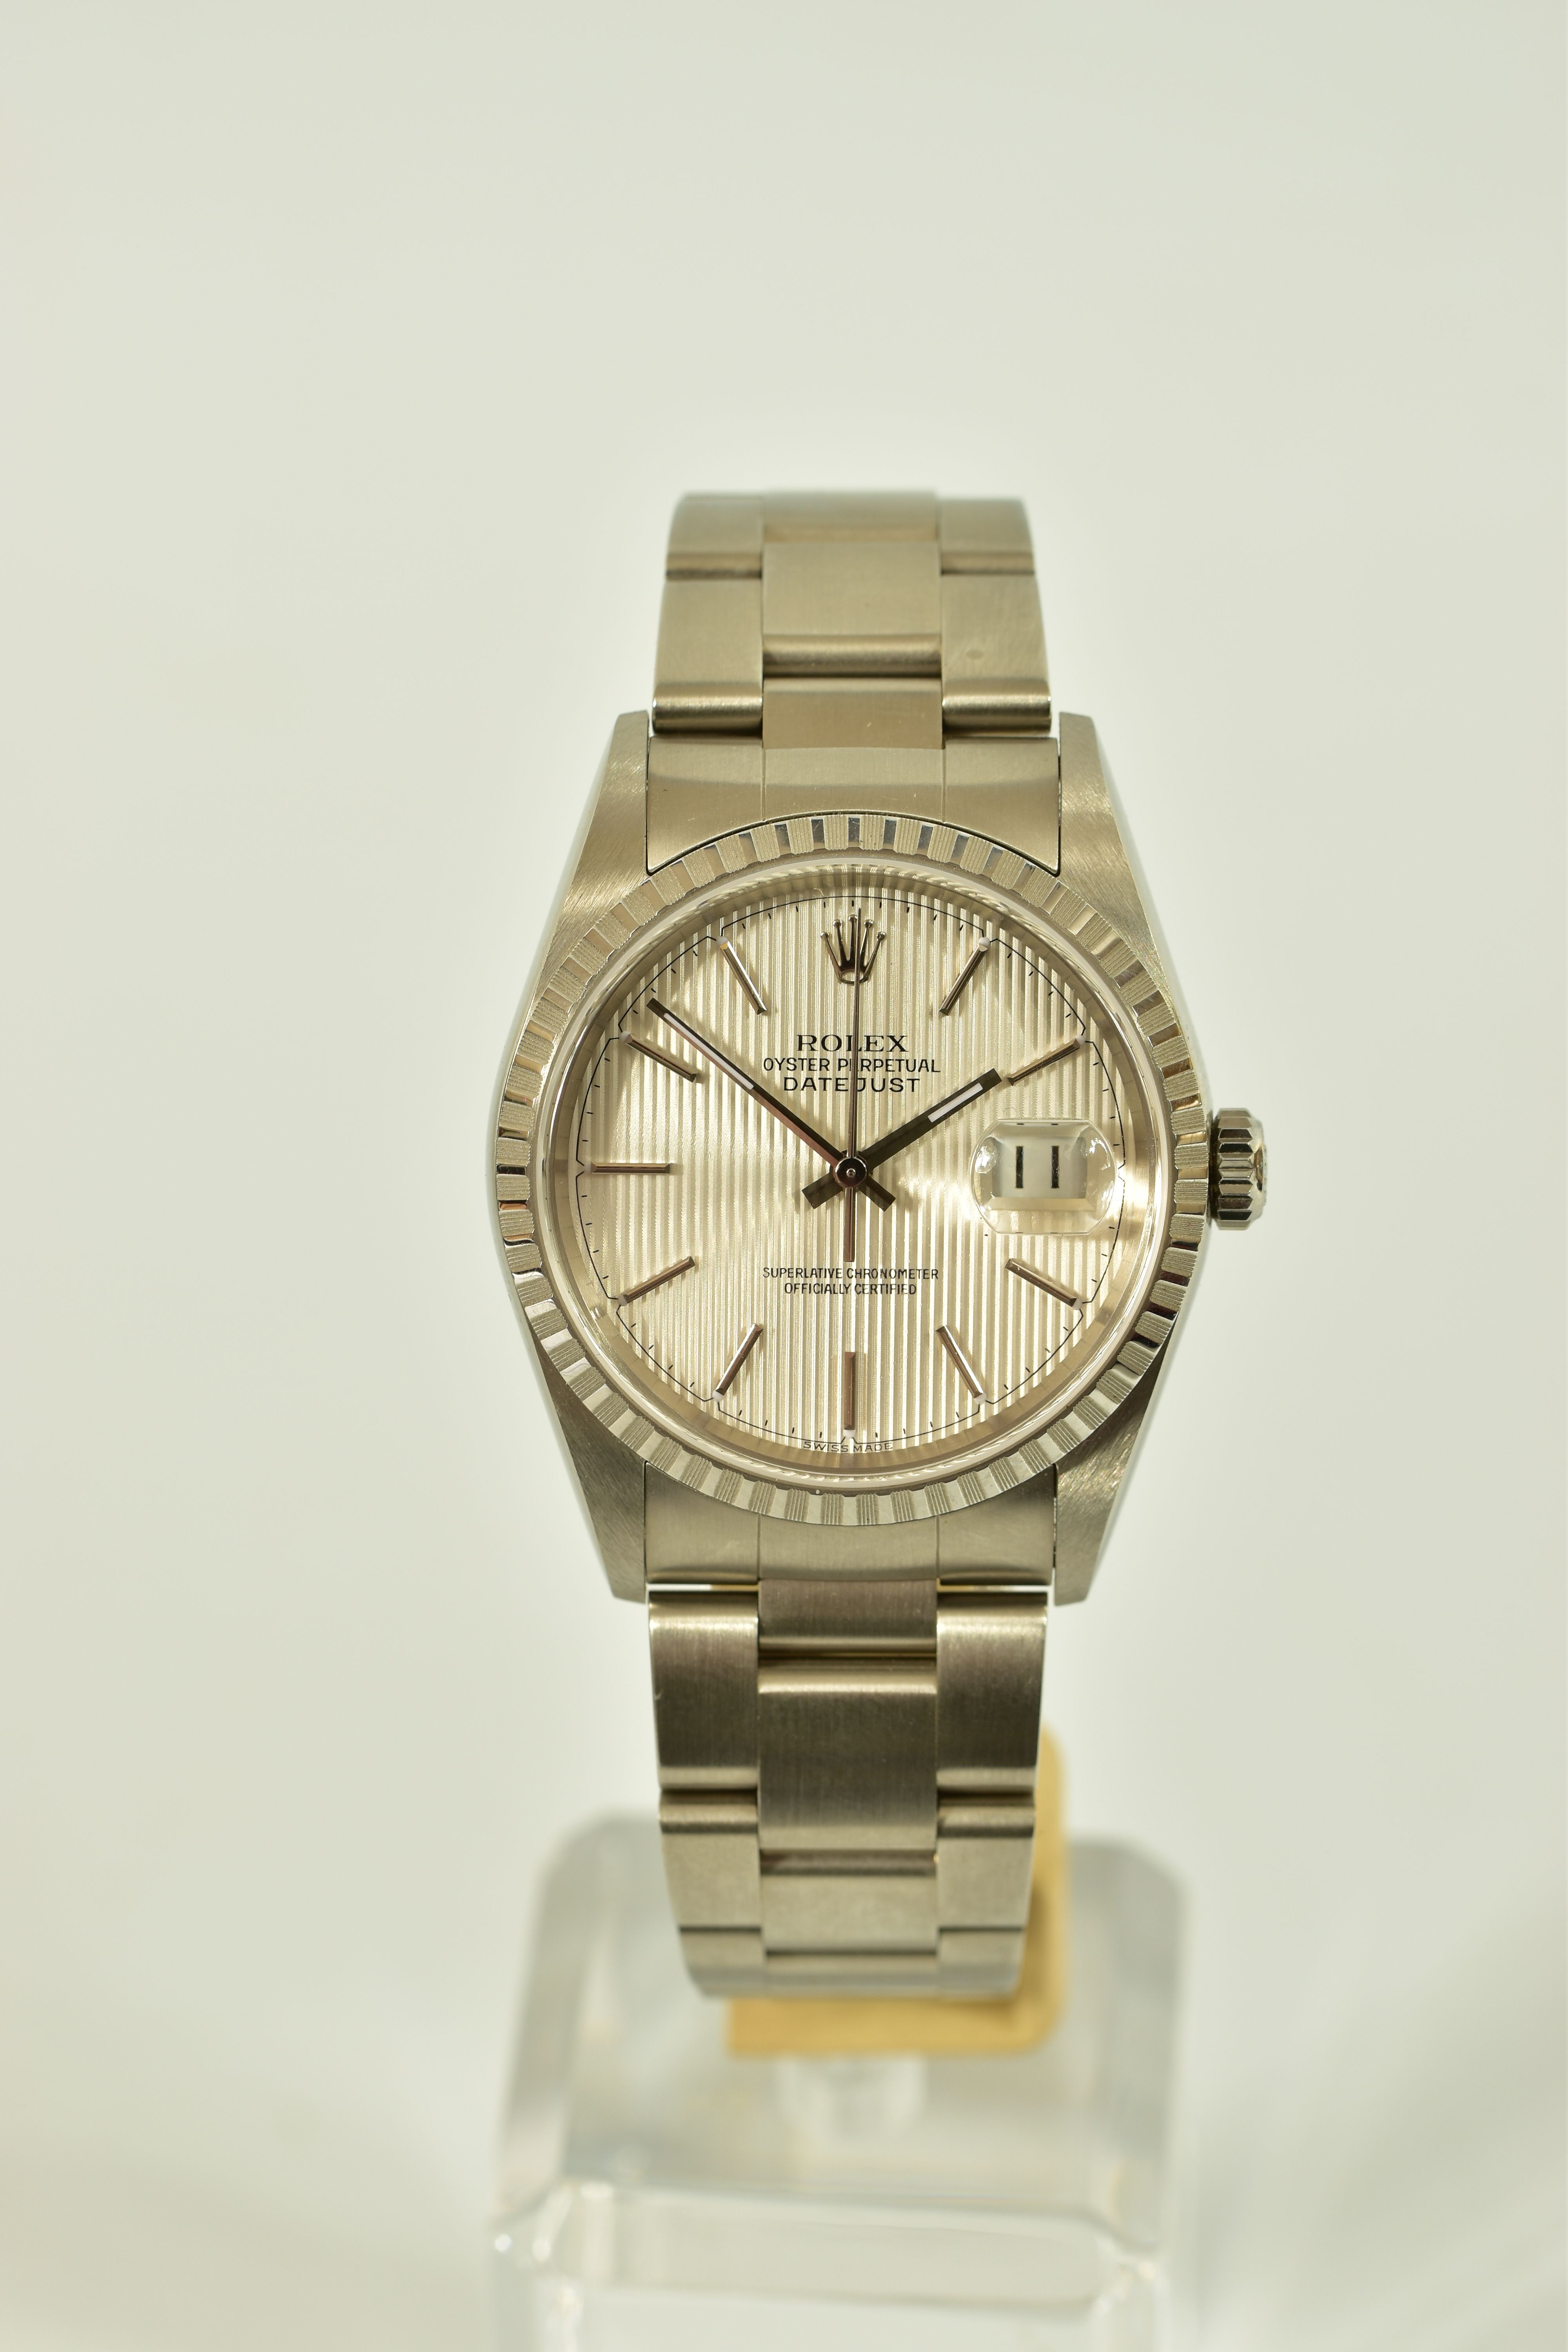 A ROLEX OYSTER PERPETUAL DATEJUST WRISTWATCH, model 16620, silver coloured stripped dial, baton